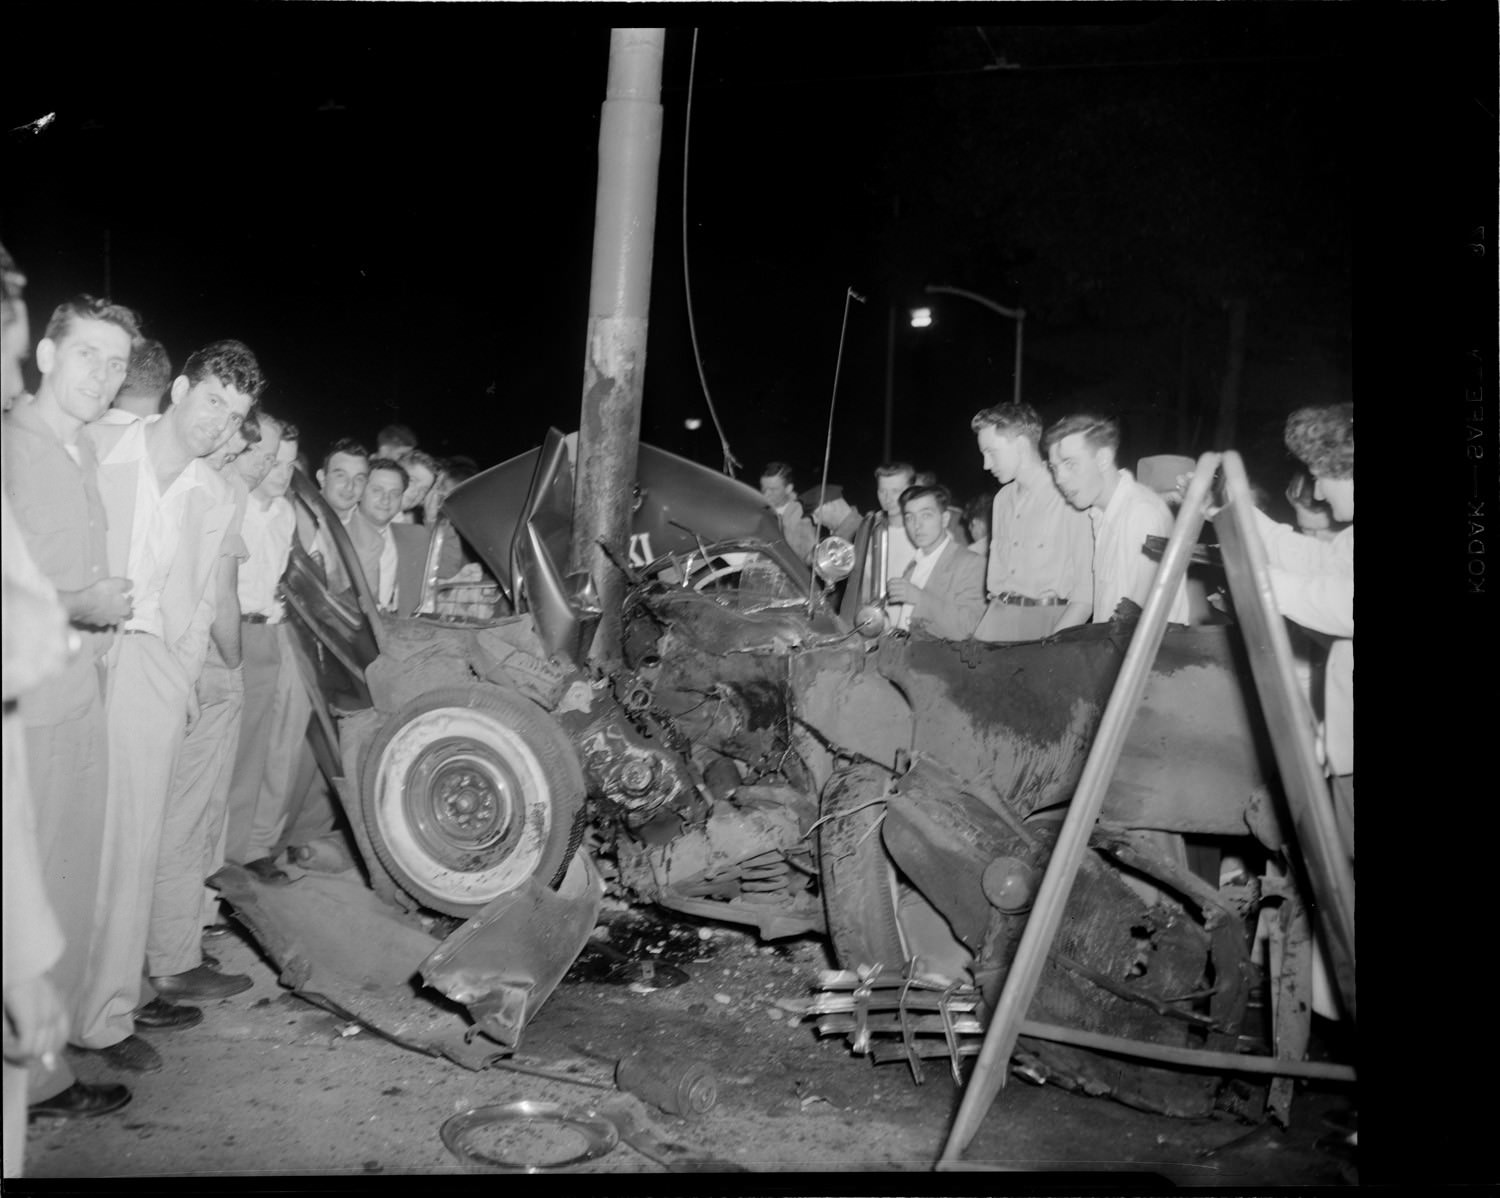 A crowd poses for the camera after a fatal car crash in the US in 1947.